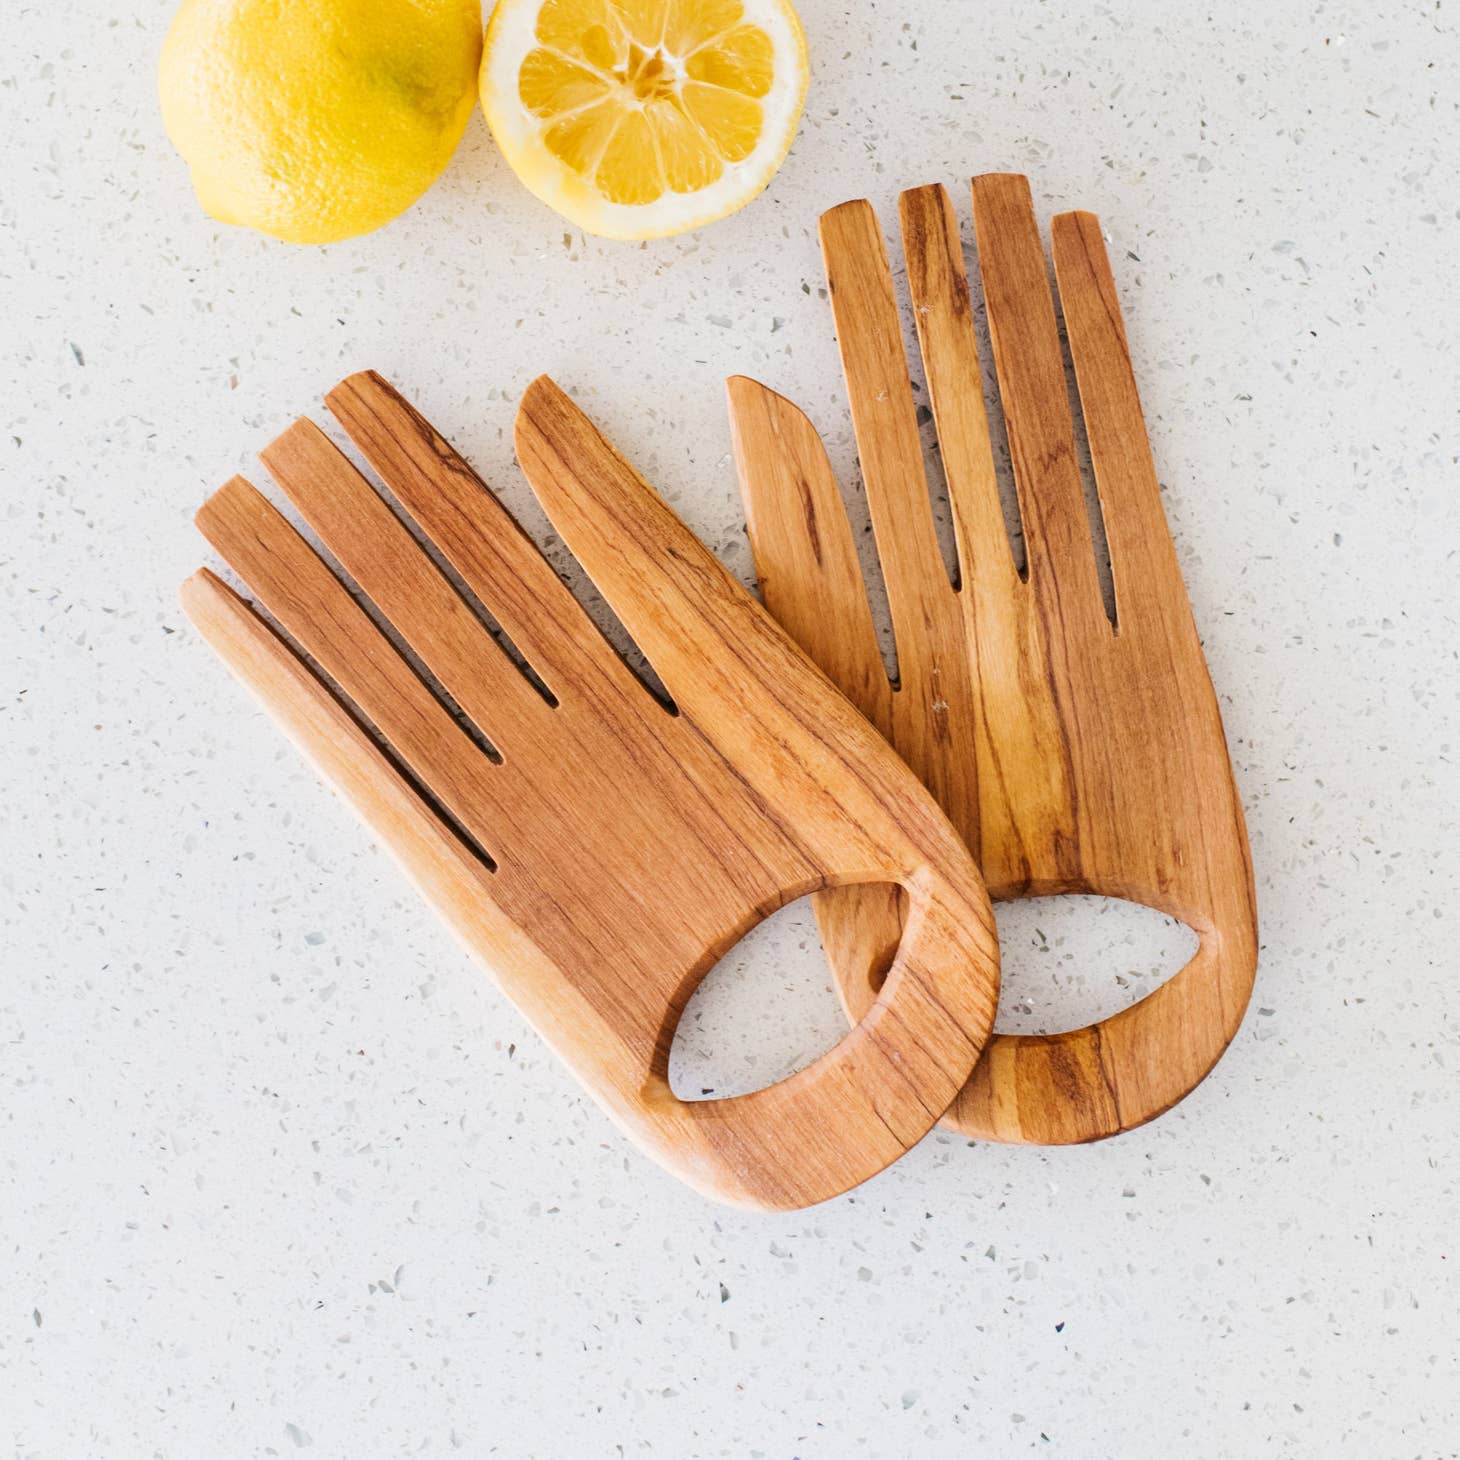 These serving hands are perfect for salads & shaped from durable olive wood. Wild olivewood has a rich grain and is indigenous to East Africa.   Ethically made in Kenya.